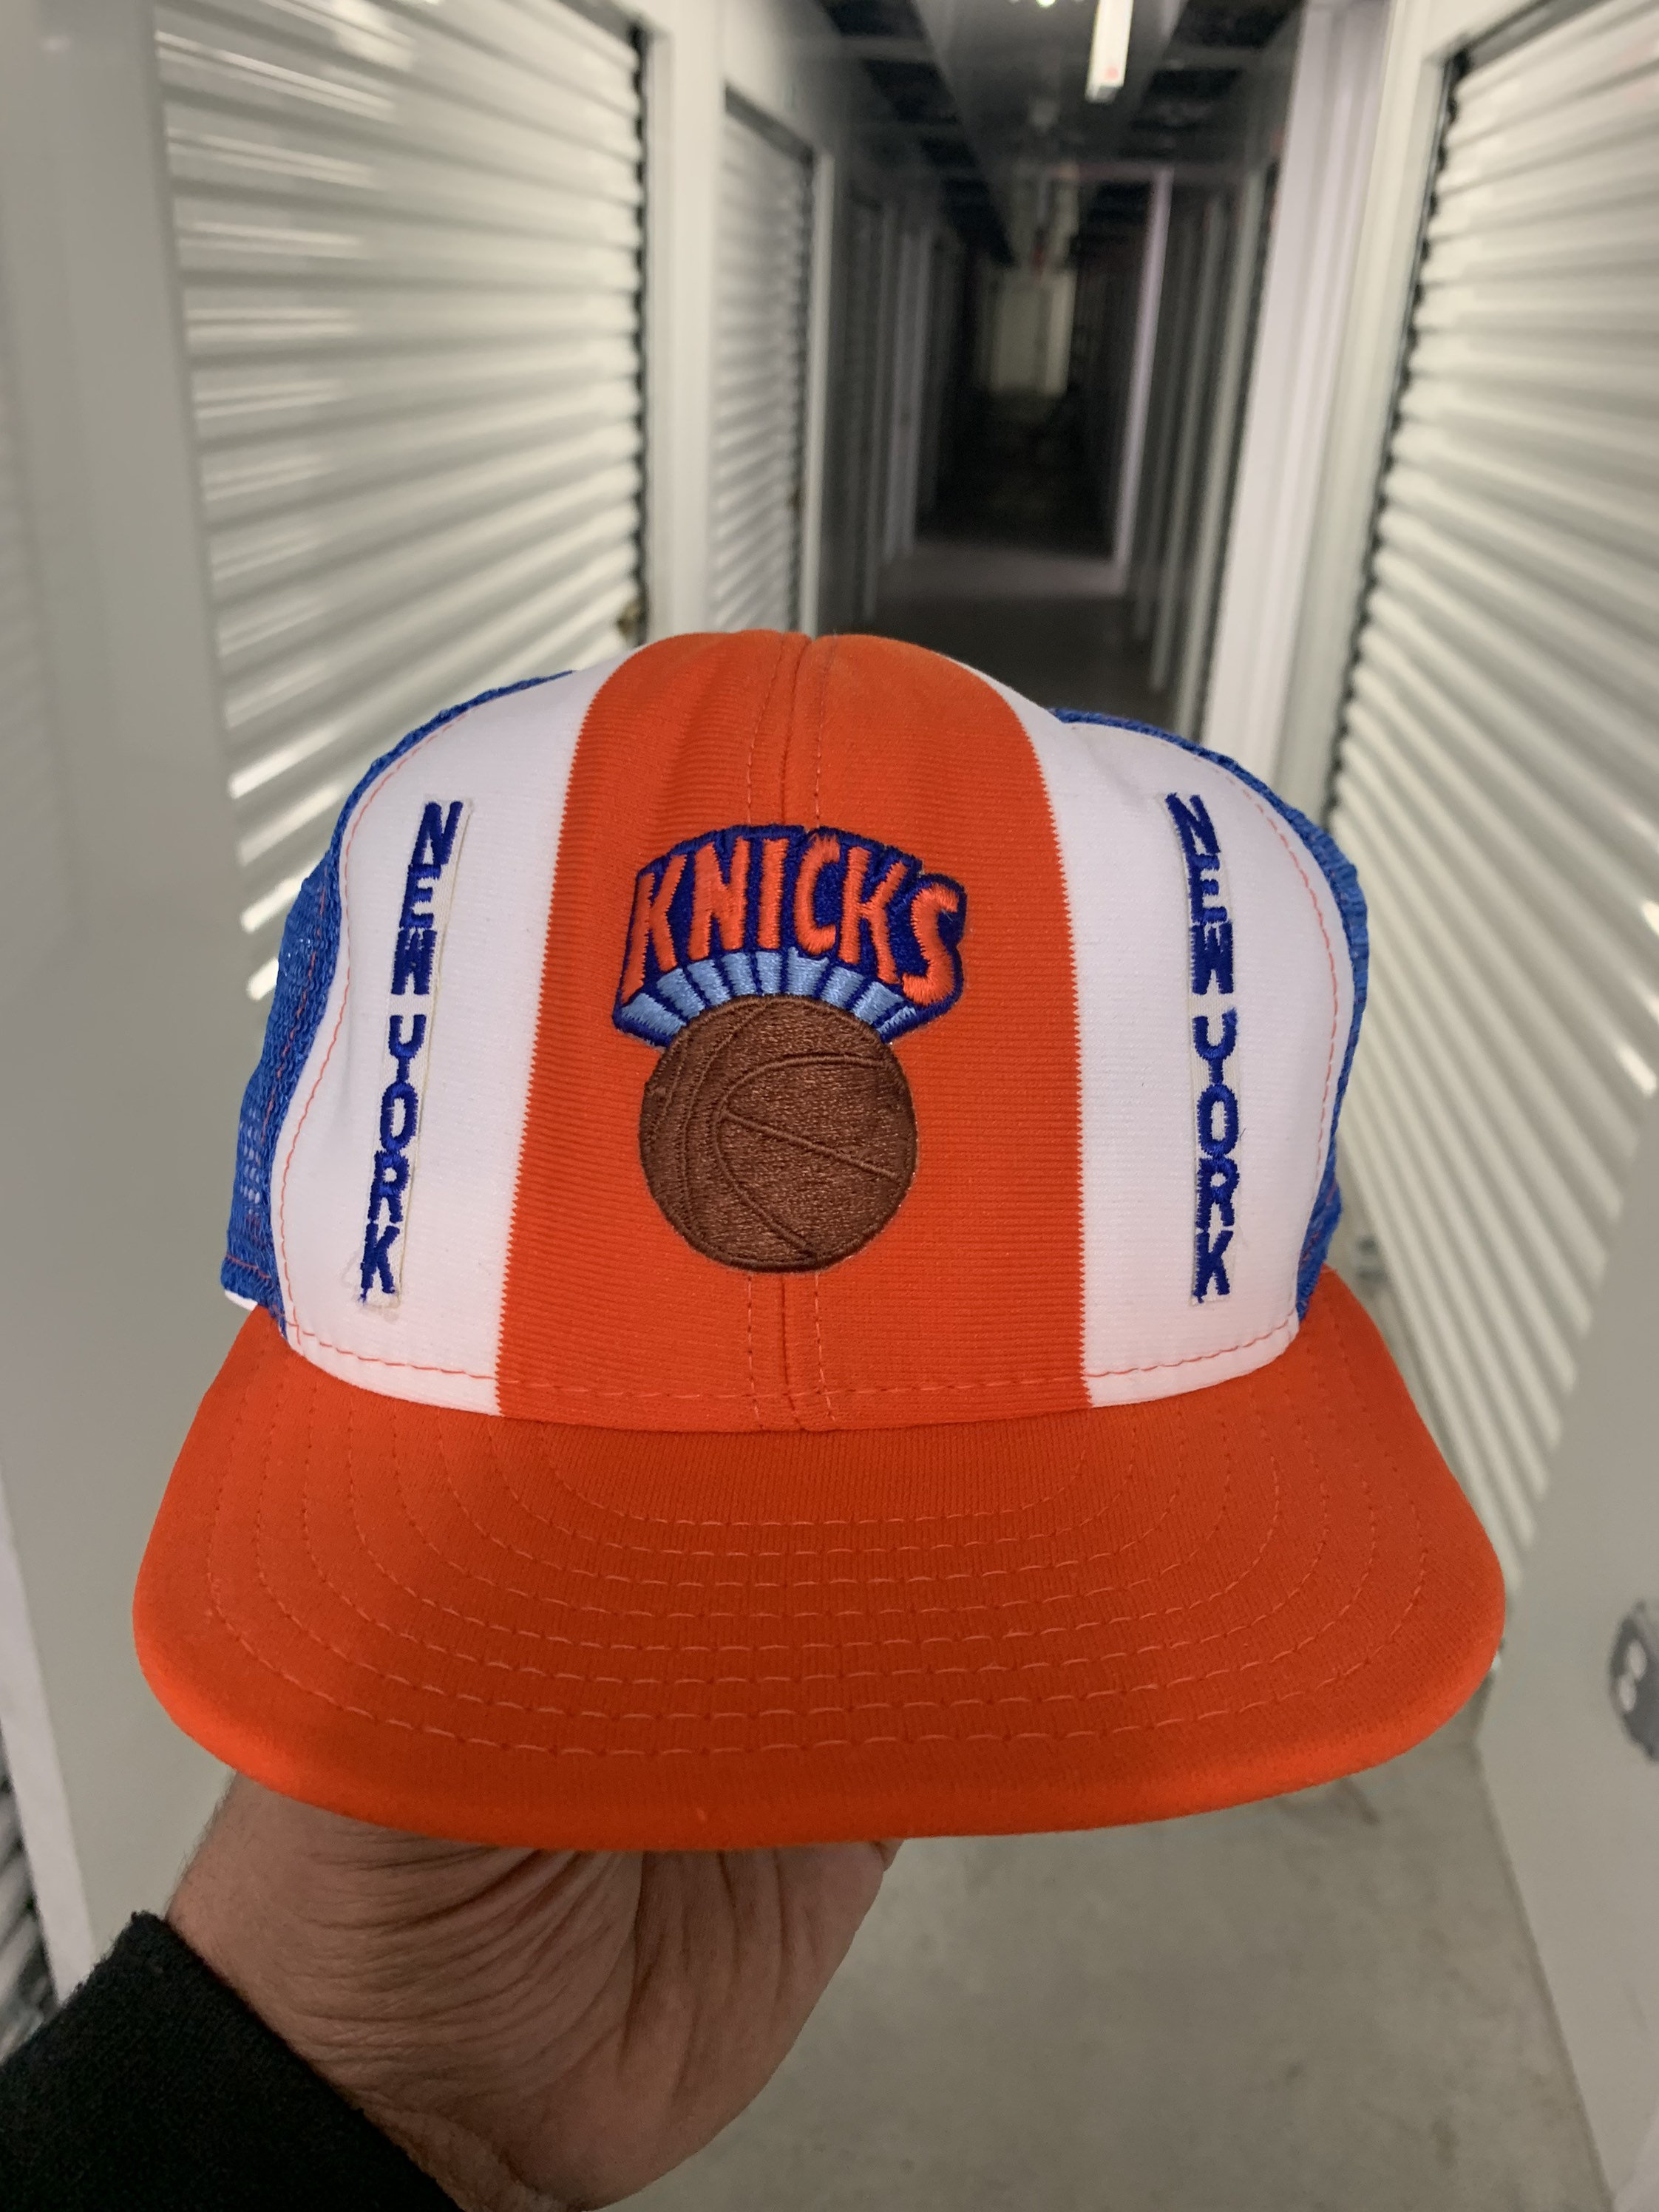 Vintage New York Knicks Snapback Hat Cap OSFA Competitor NBA Basketball Madison Square Garden MSG NYC Classic Blue 1990s 90s